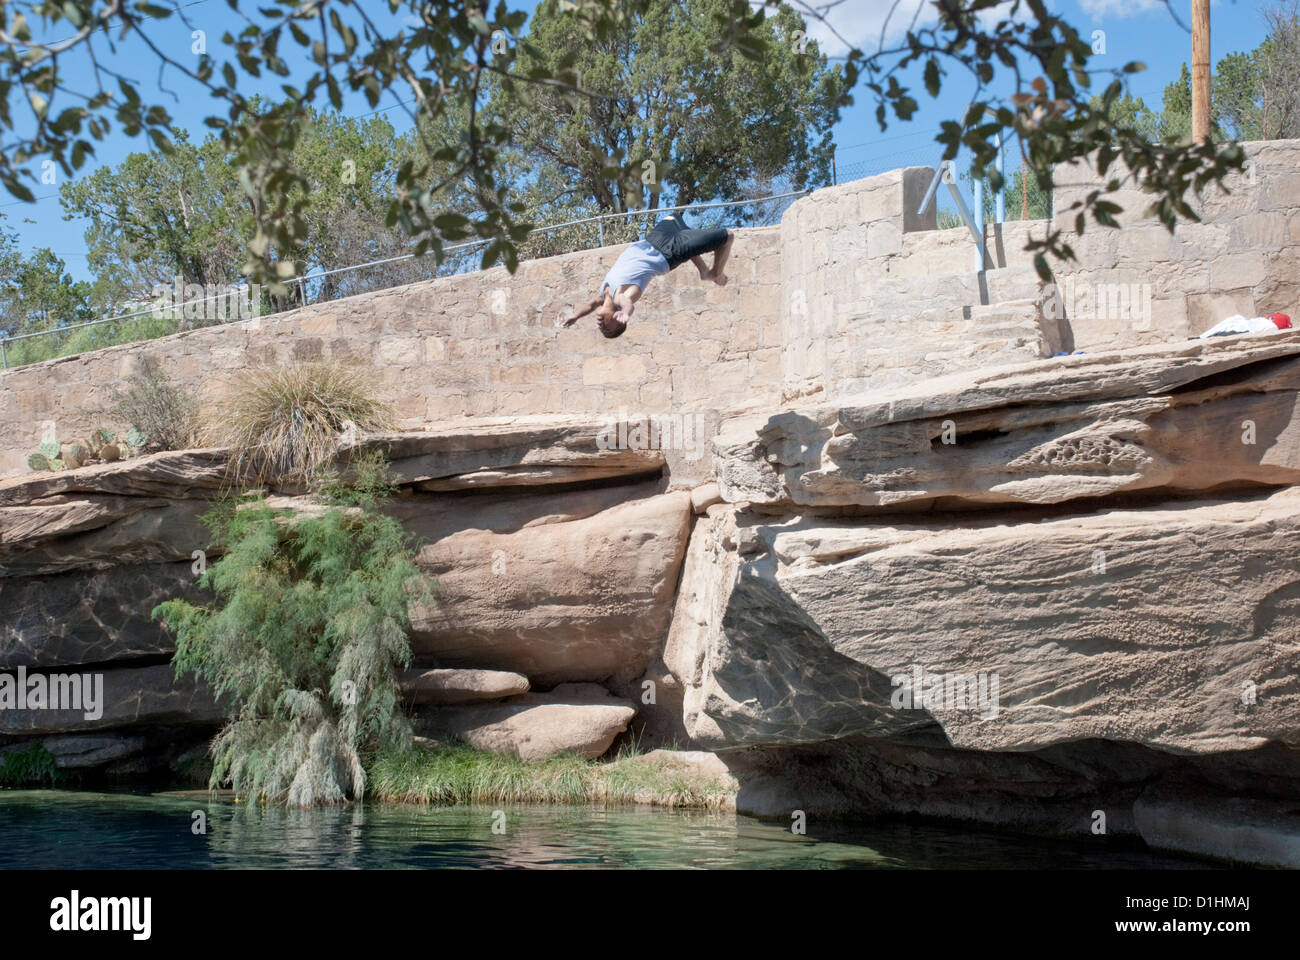 A diver dives backwards off a rock ledge at the famous Blue Hole in Santa Rosa, New Mexico. Stock Photo